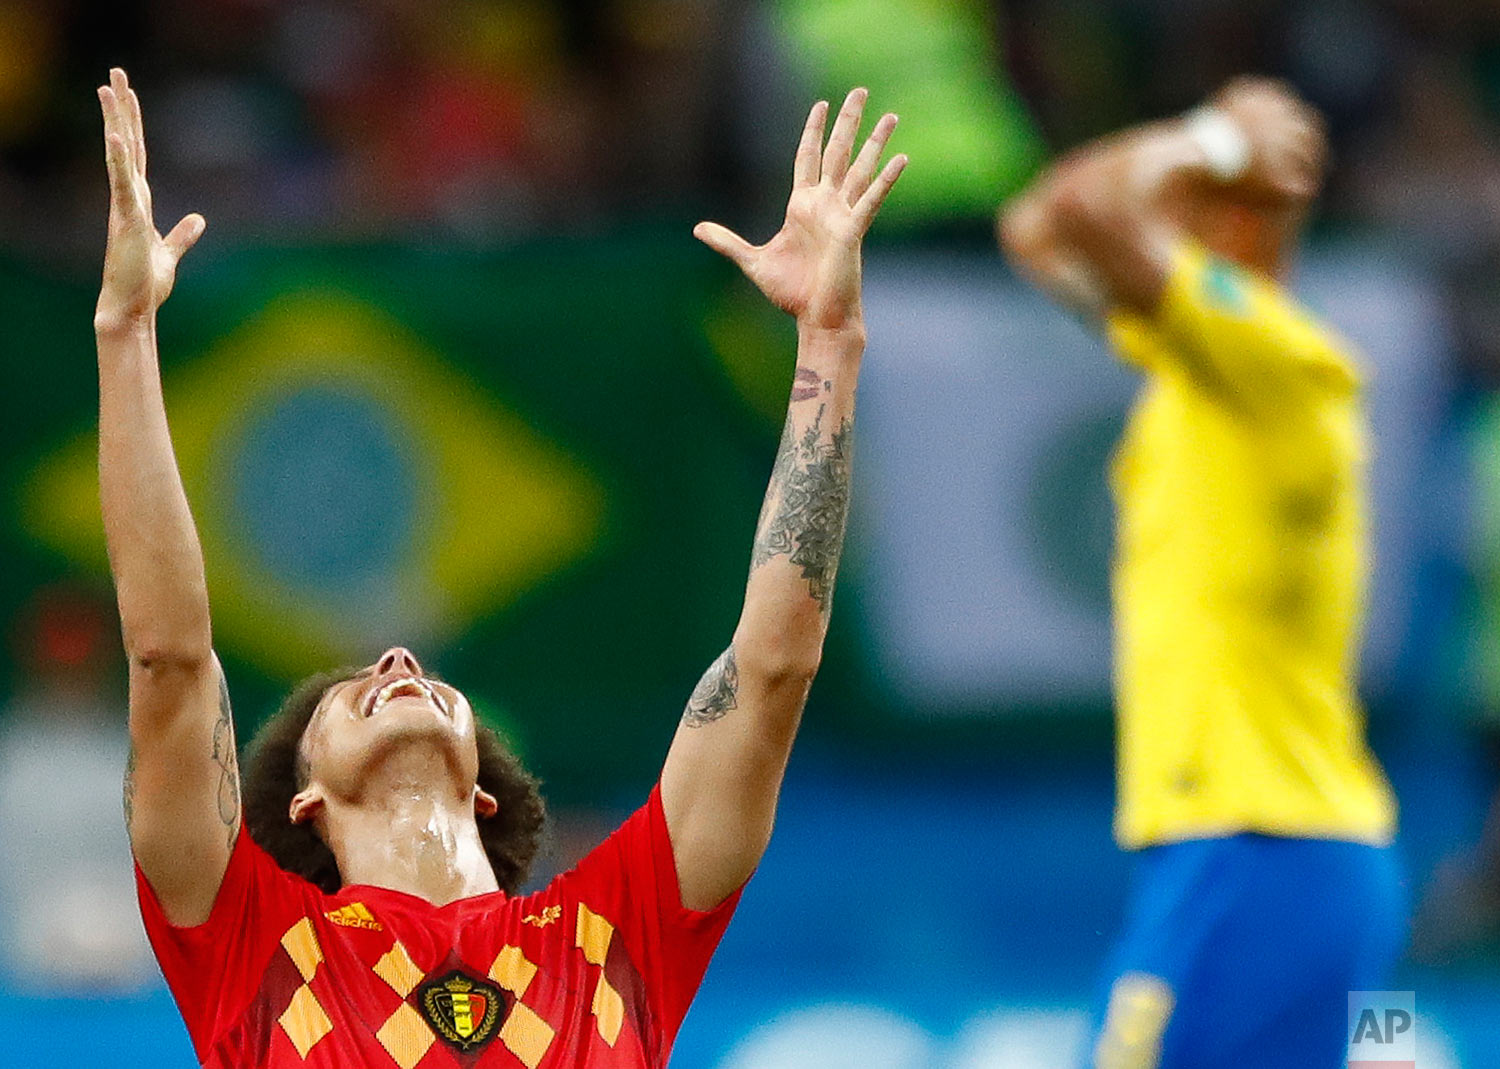  Belgium's Axel Witsel, centre celebrates after the final whistle as Belgium defeat Brazil in their quarterfinal match between Brazil and Belgium at the 2018 soccer World Cup in the Kazan Arena, in Kazan, Russia, Friday, July 6, 2018. Belgium won the